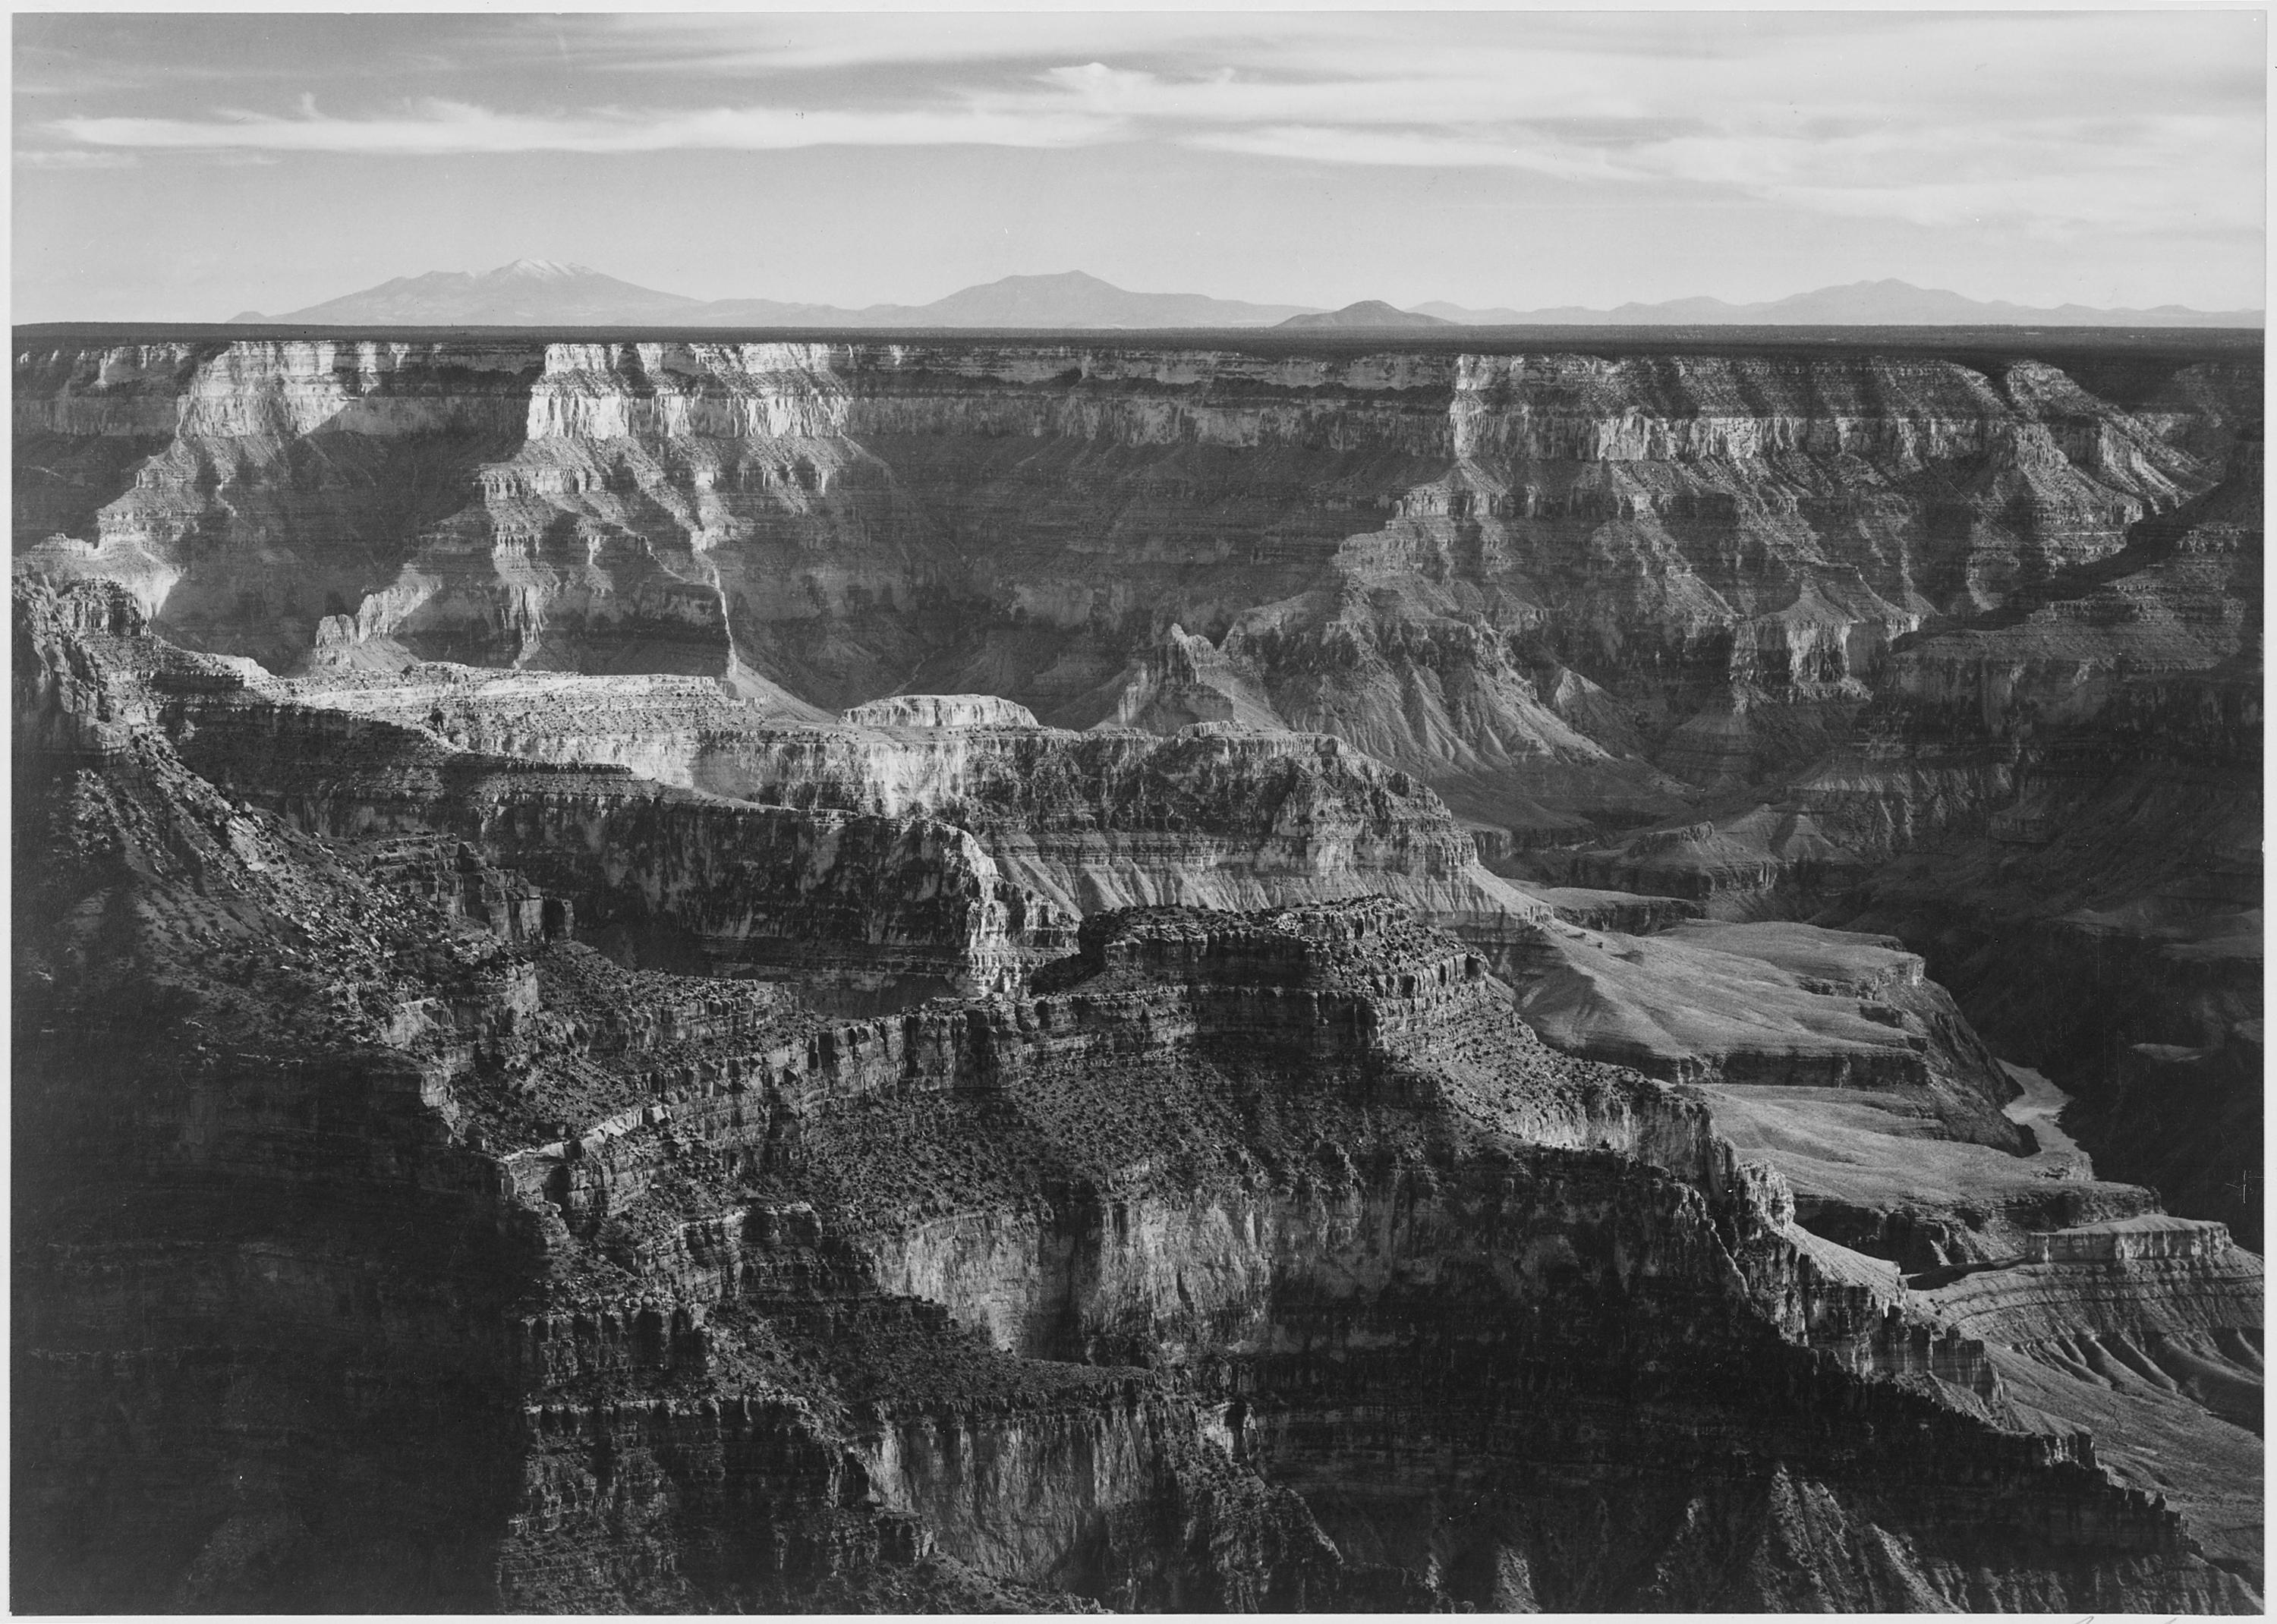 Ansel Adams - National Archives 79-AA-F12